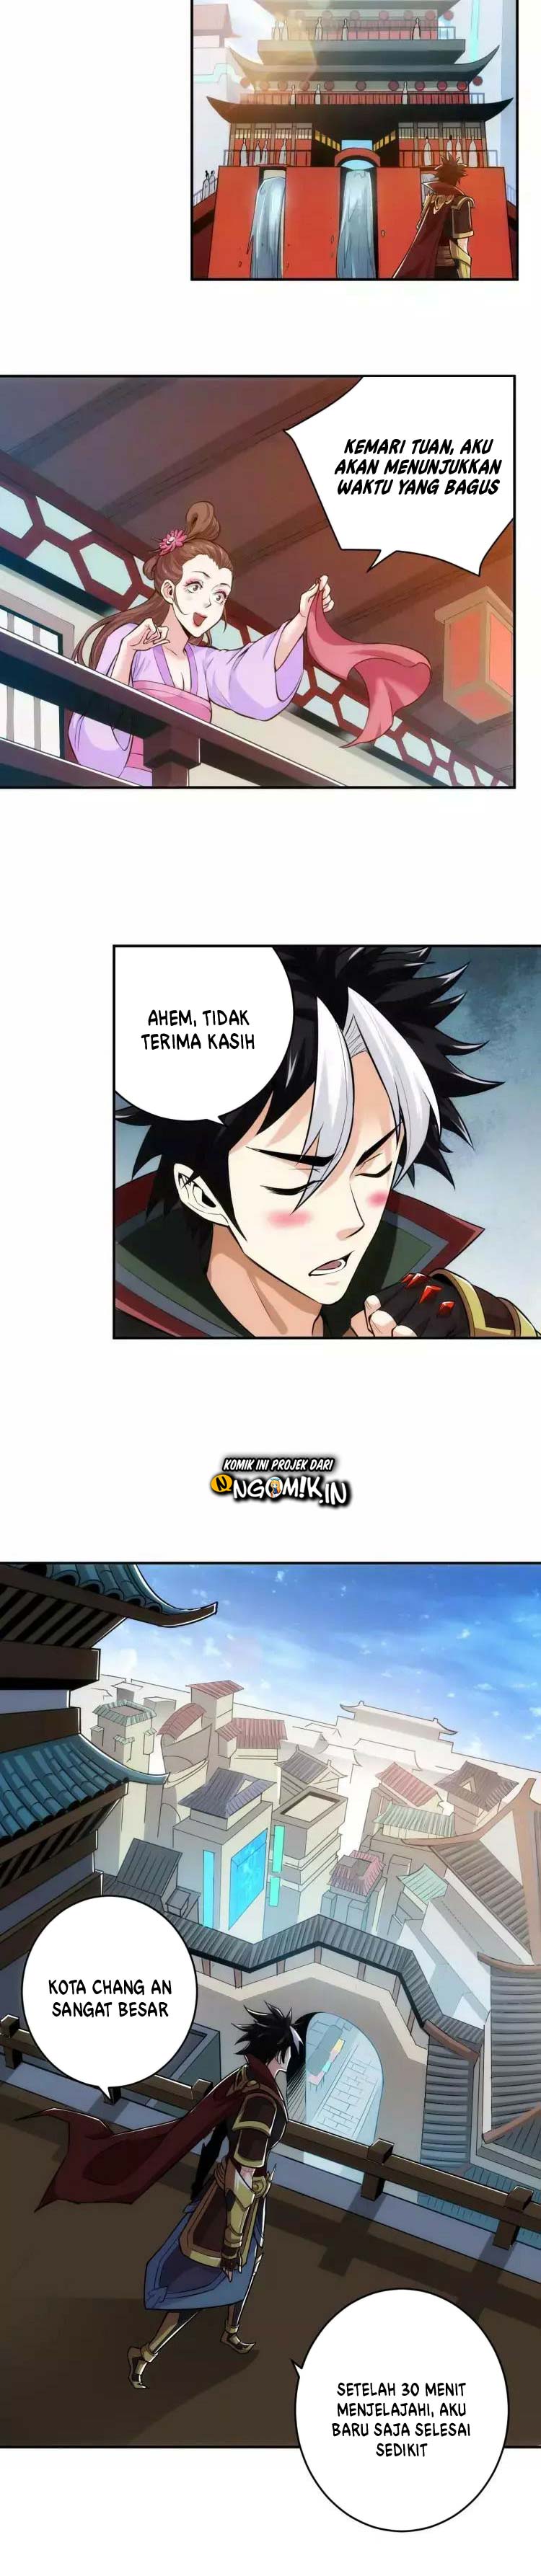 Rich Player Chapter 23 5